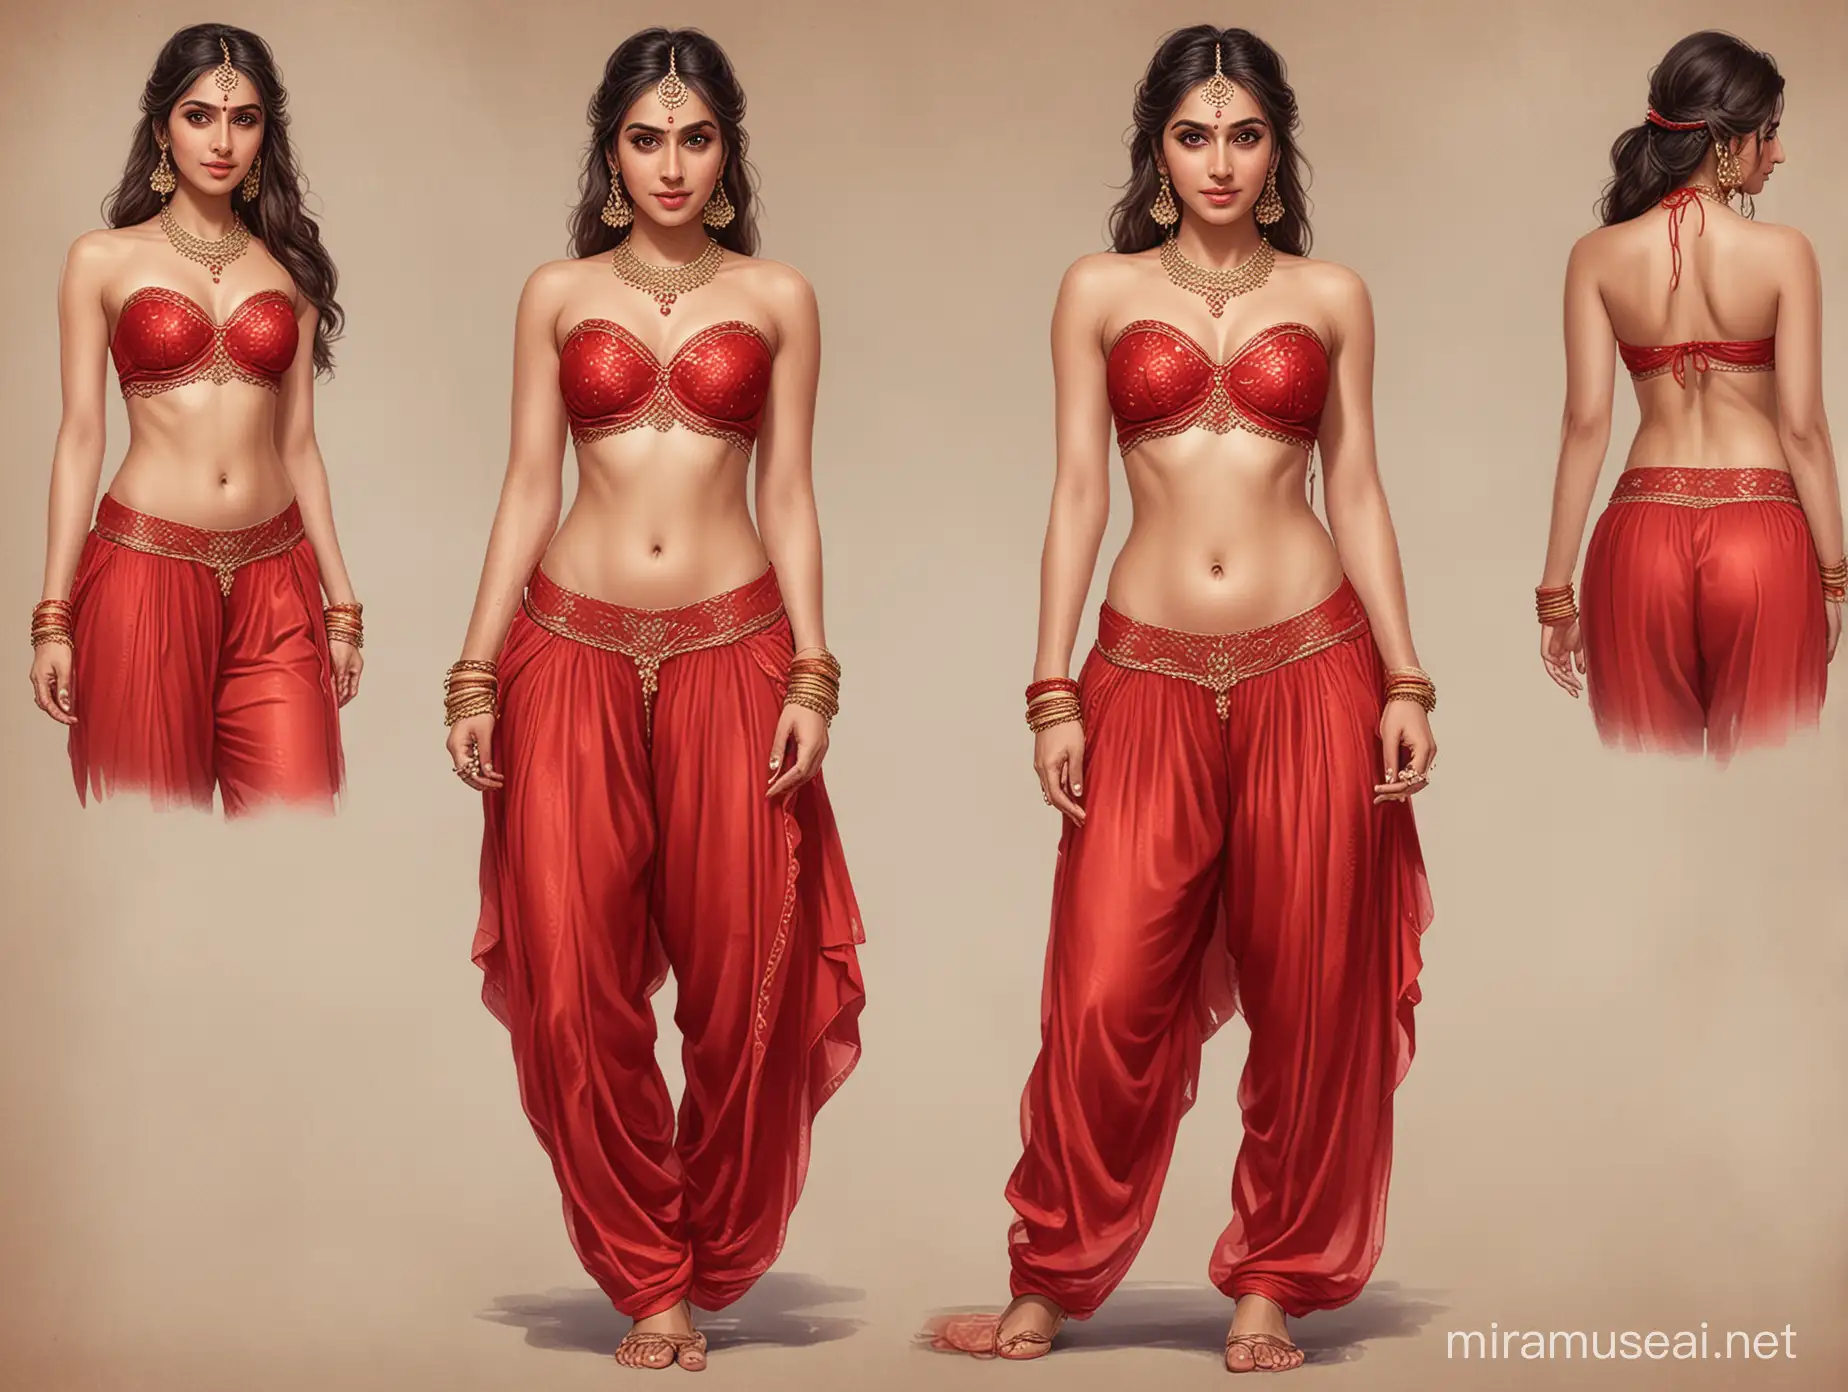 generate an illustration art style image of Anita Hasnandani, wearing traditional bandeau red lingerie and red transparent harem pant, with appropriate accessories such as bangles, armlets and a bindi, while maintaining her recognizable features and elegance.. full body image.